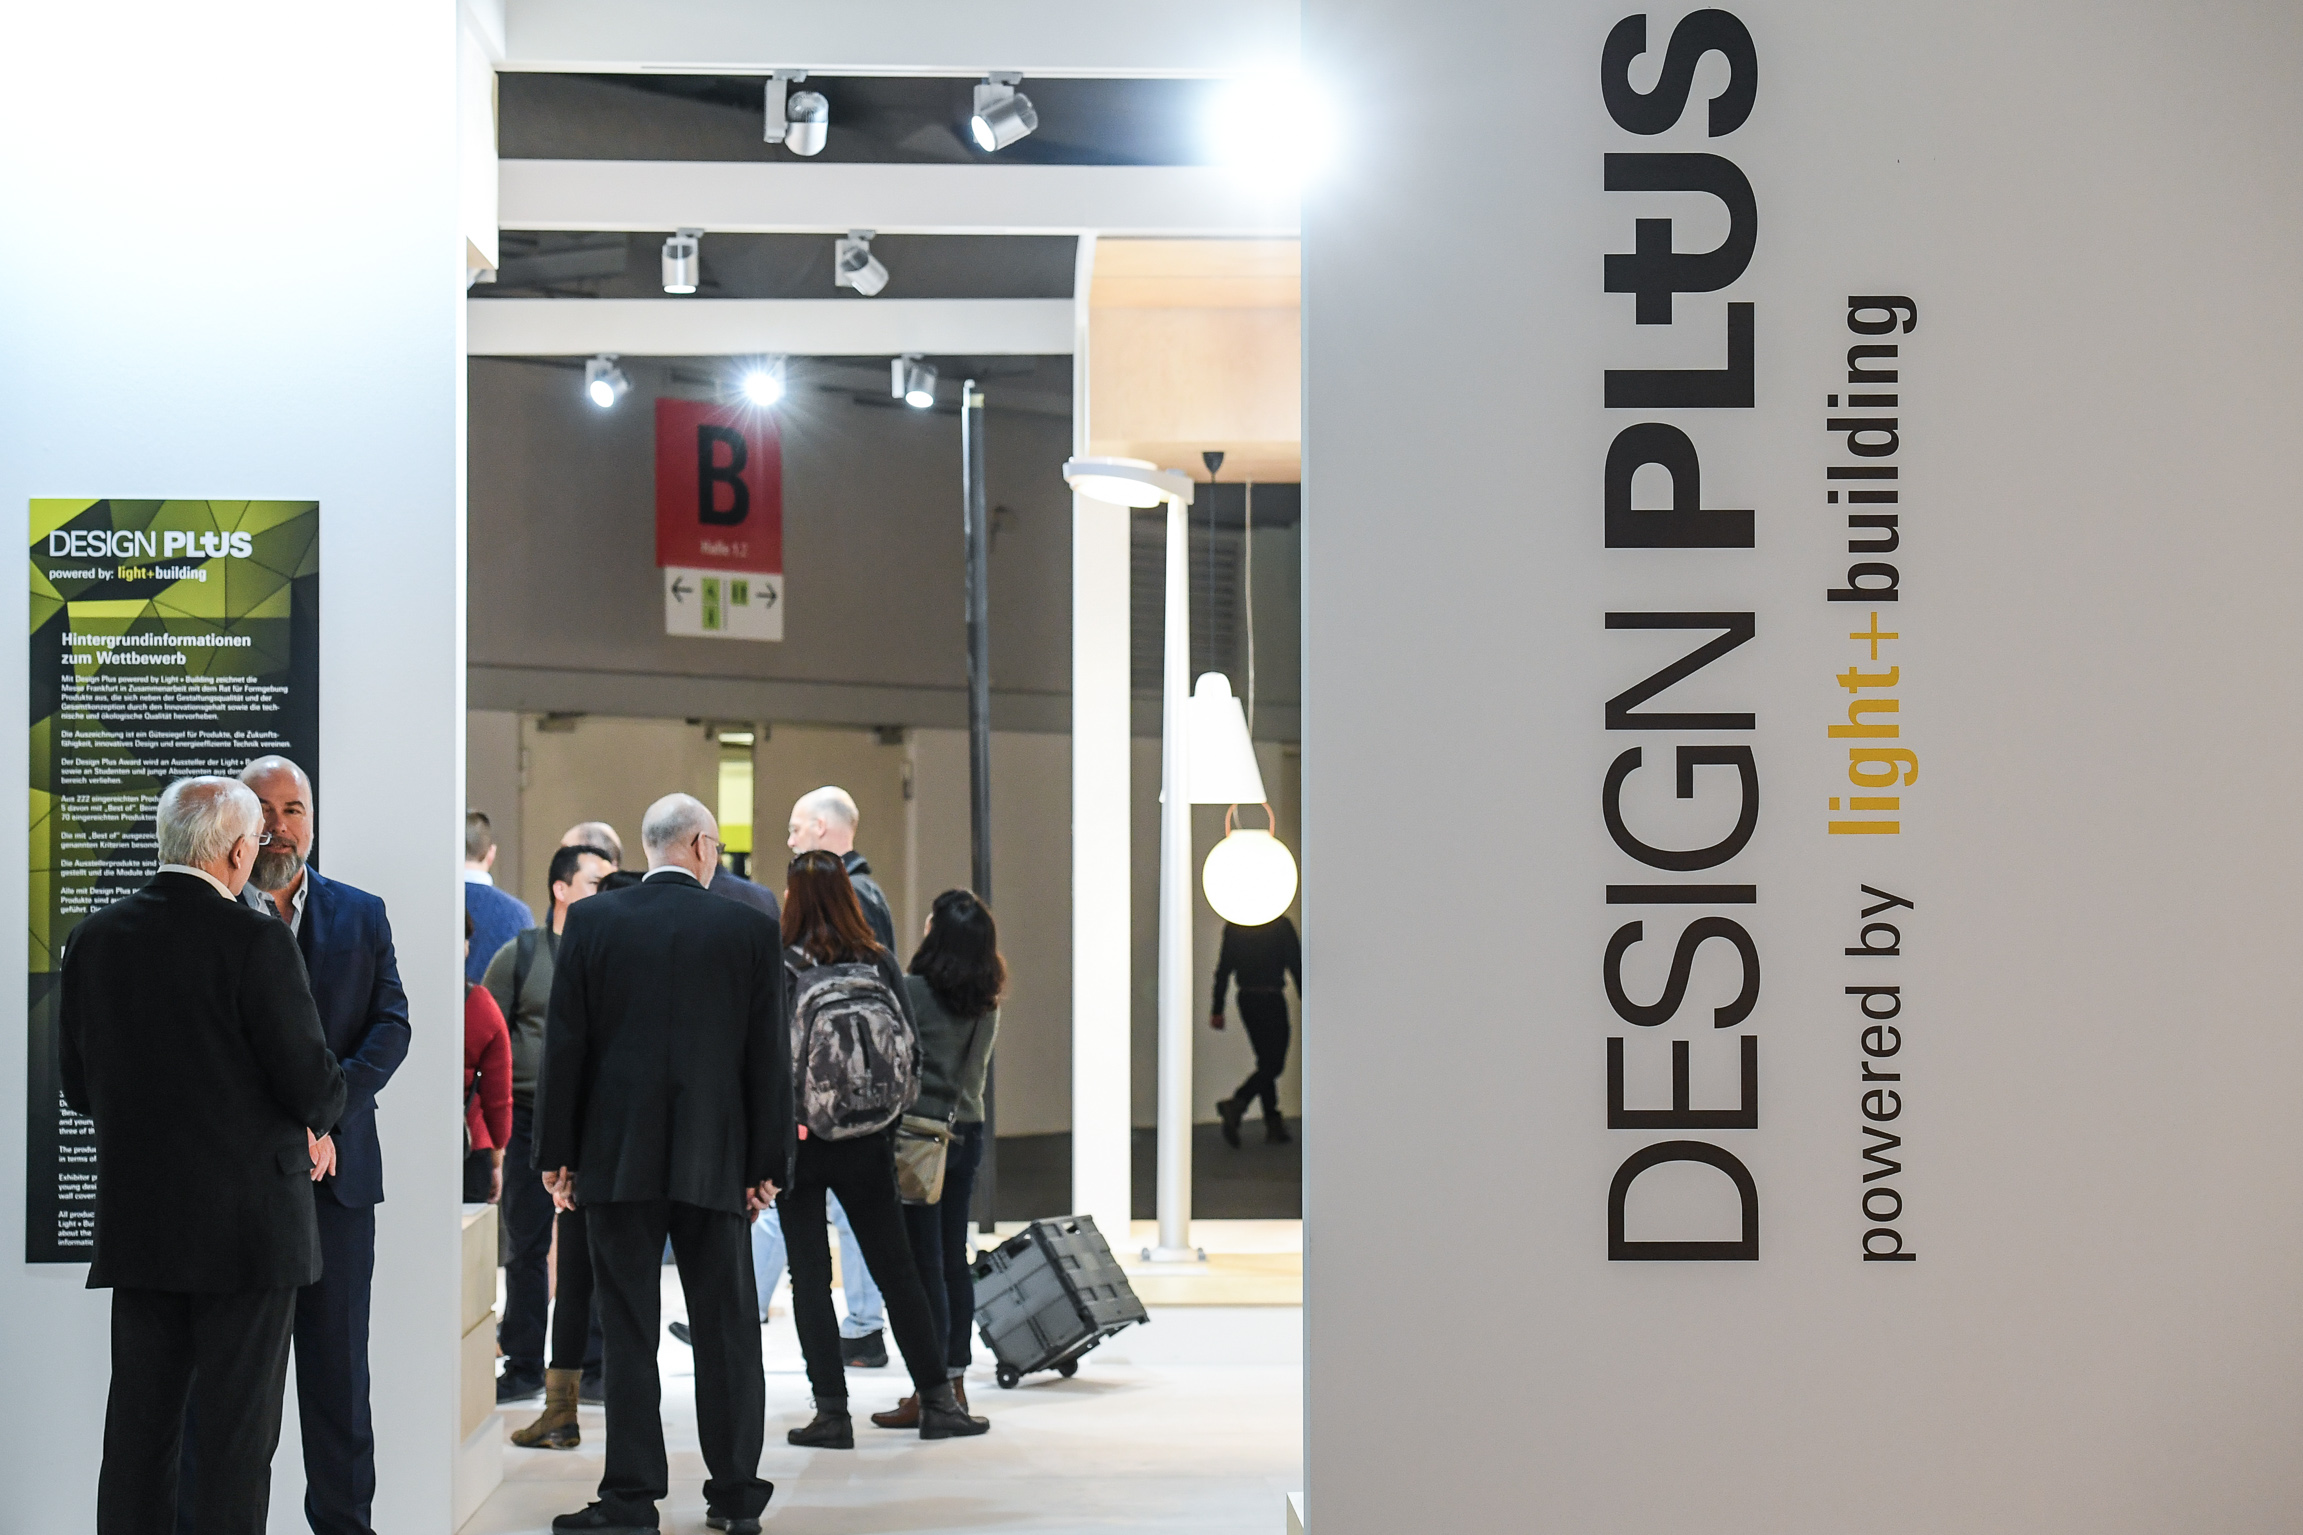 Orientation in the variety of innovations is provided by special presentations such as the exhibition of Design Plus winners in Hall 3.1.